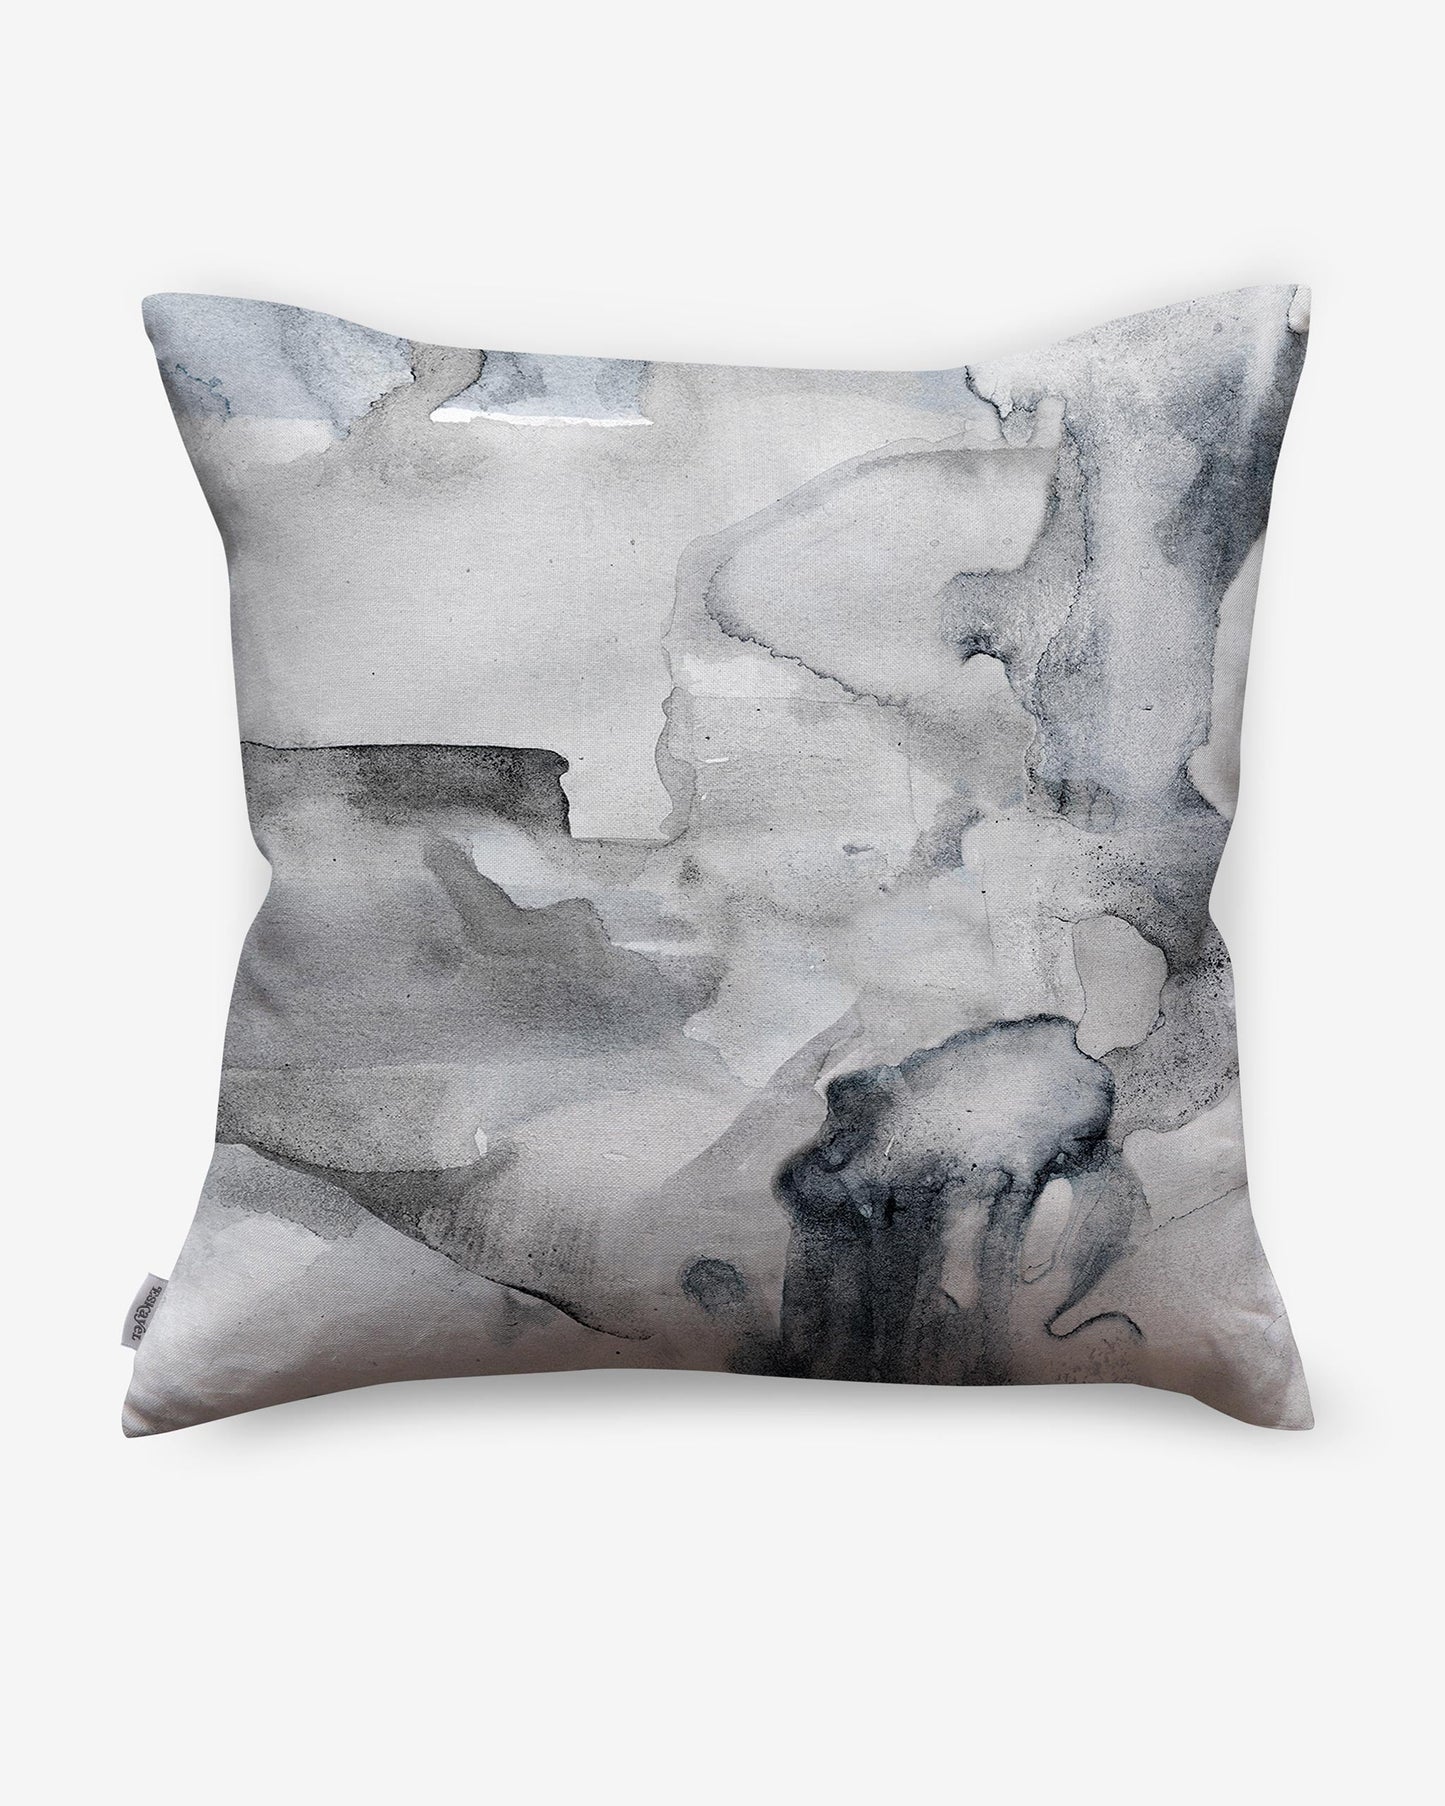 A Palmeraie Pillow with a watercolor painting on luxury fabric in Marrakech